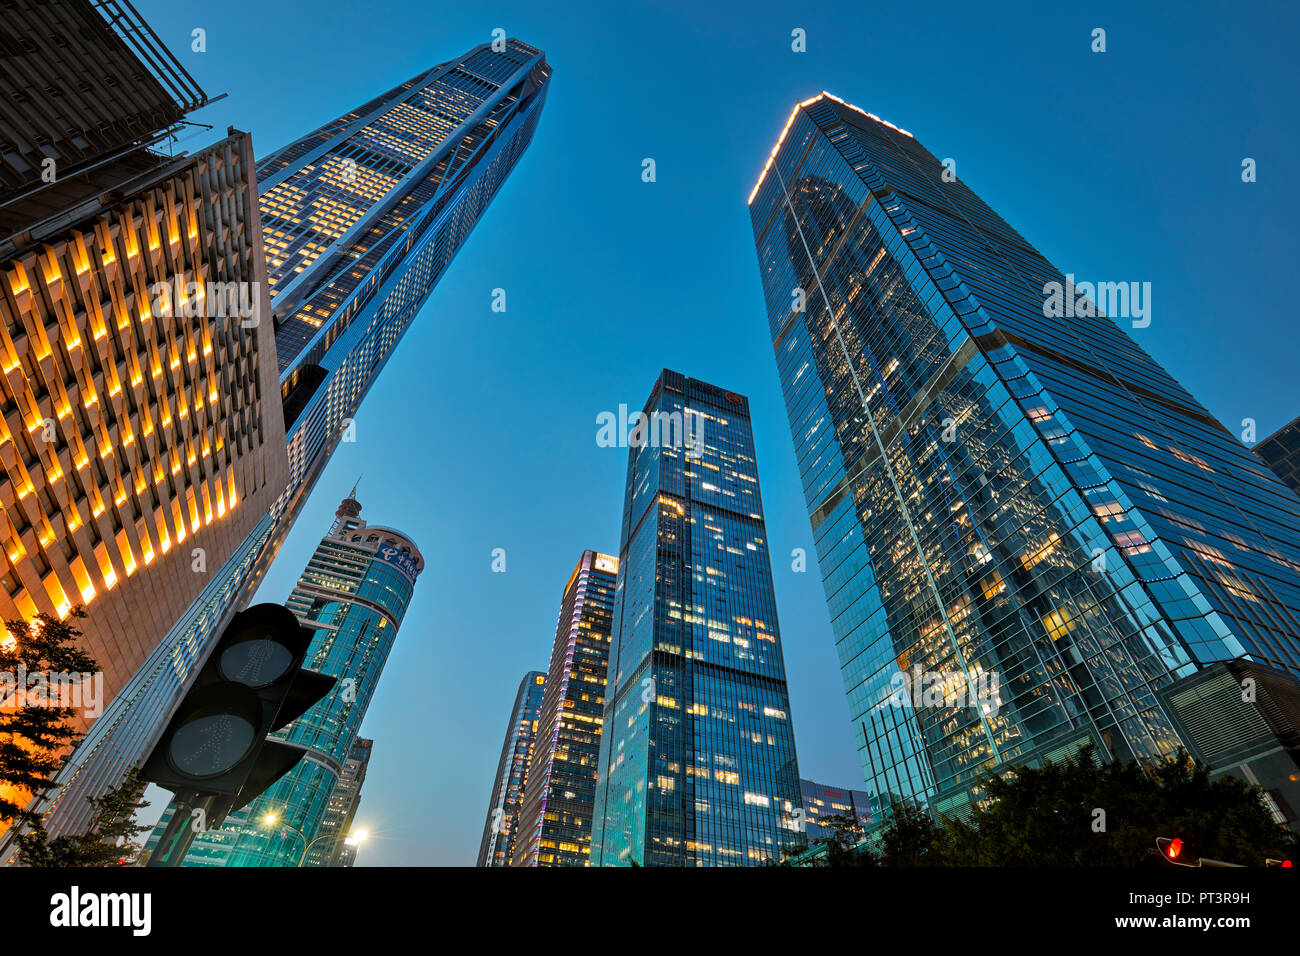 High-rise buildings in Futian Central Business District (CBD) illuminated at dusk. Shenzhen, Guangdong Province, China. Stock Photo